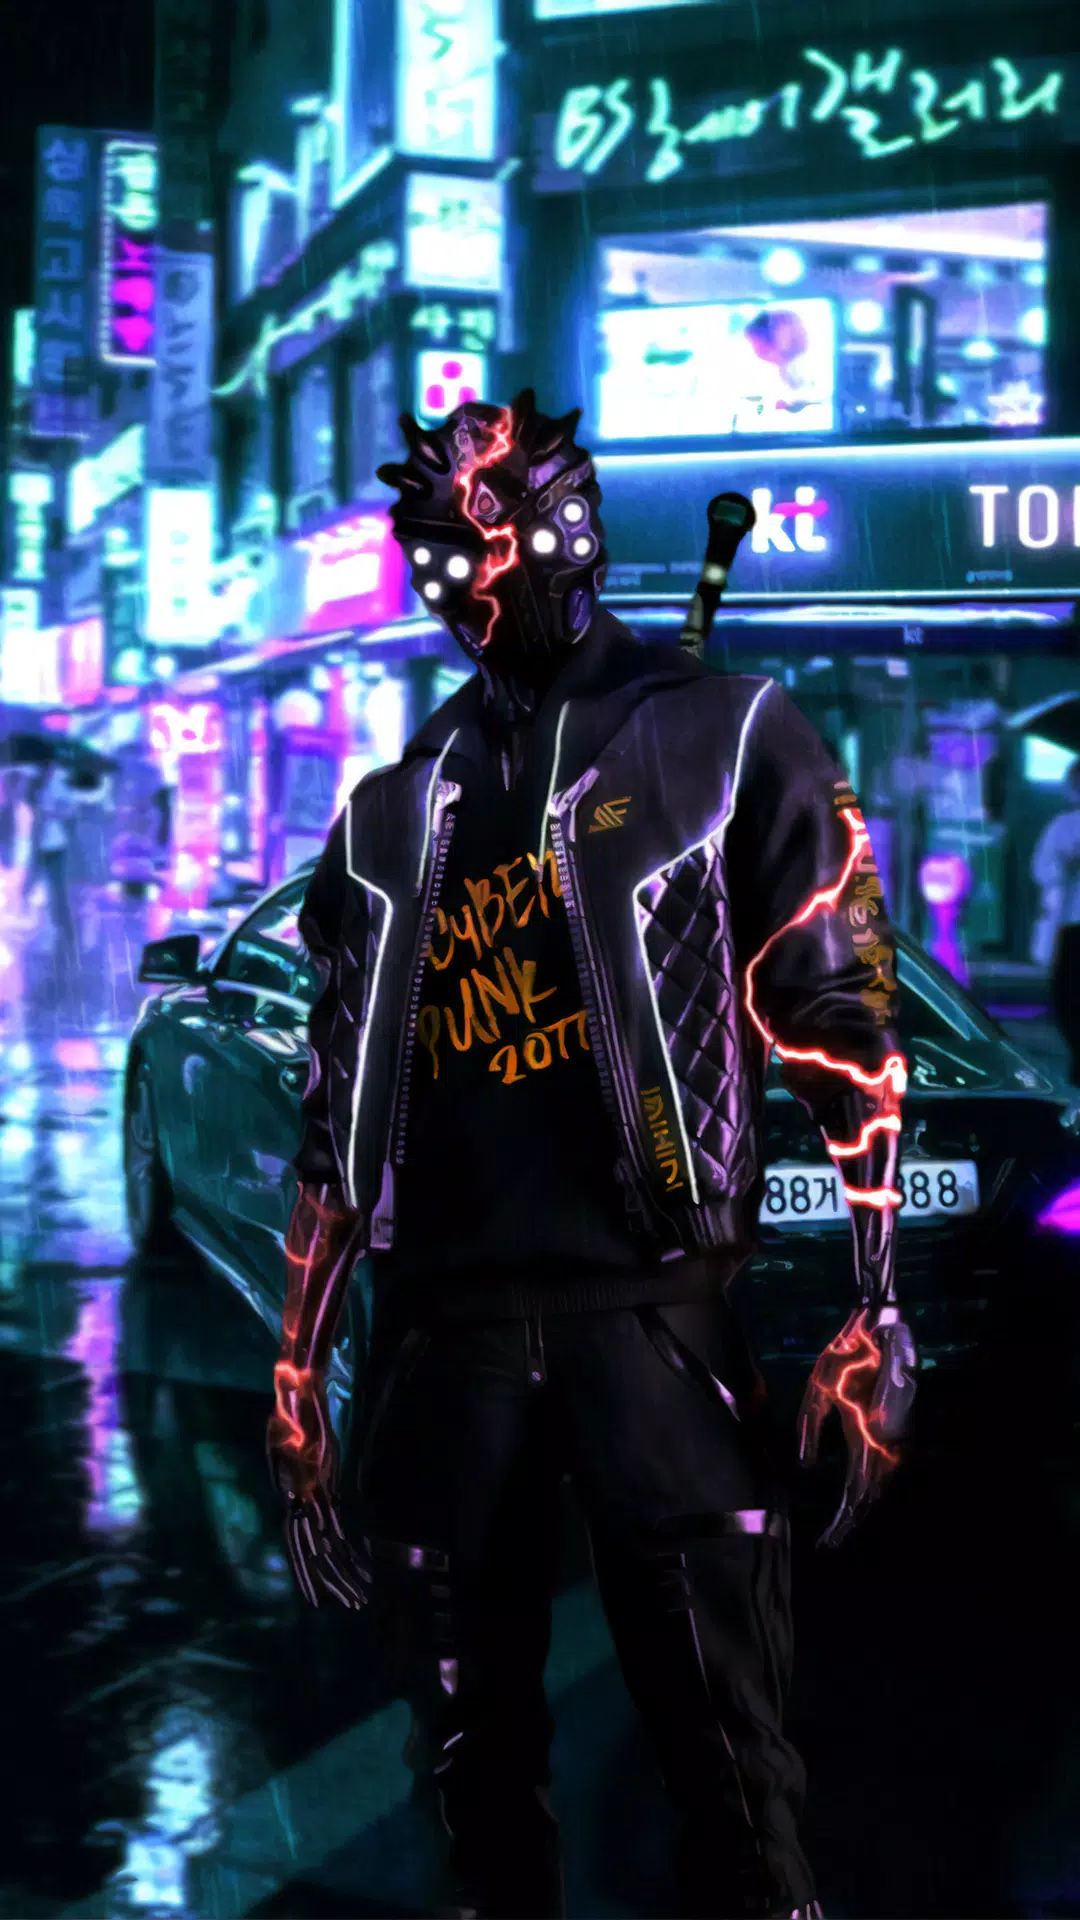 A man in black and neon clothing standing on the street - Cyberpunk